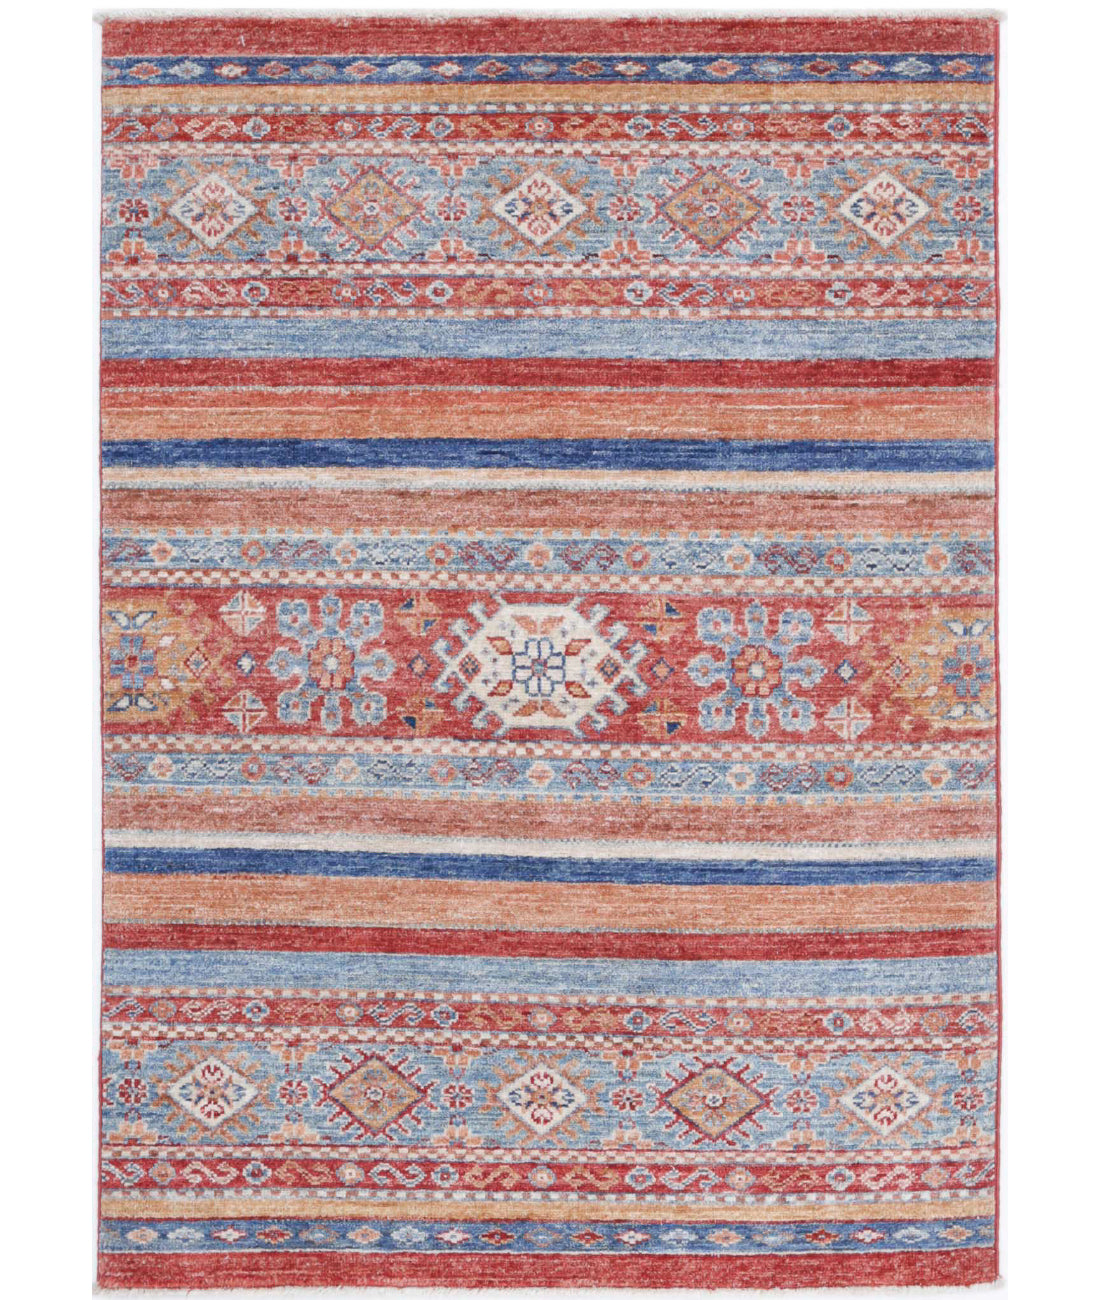 Hand Knotted Khurjeen Wool Rug - 2'8'' x 3'11'' 2'8'' x 3'11'' (80 X 118) / Multi / Multi